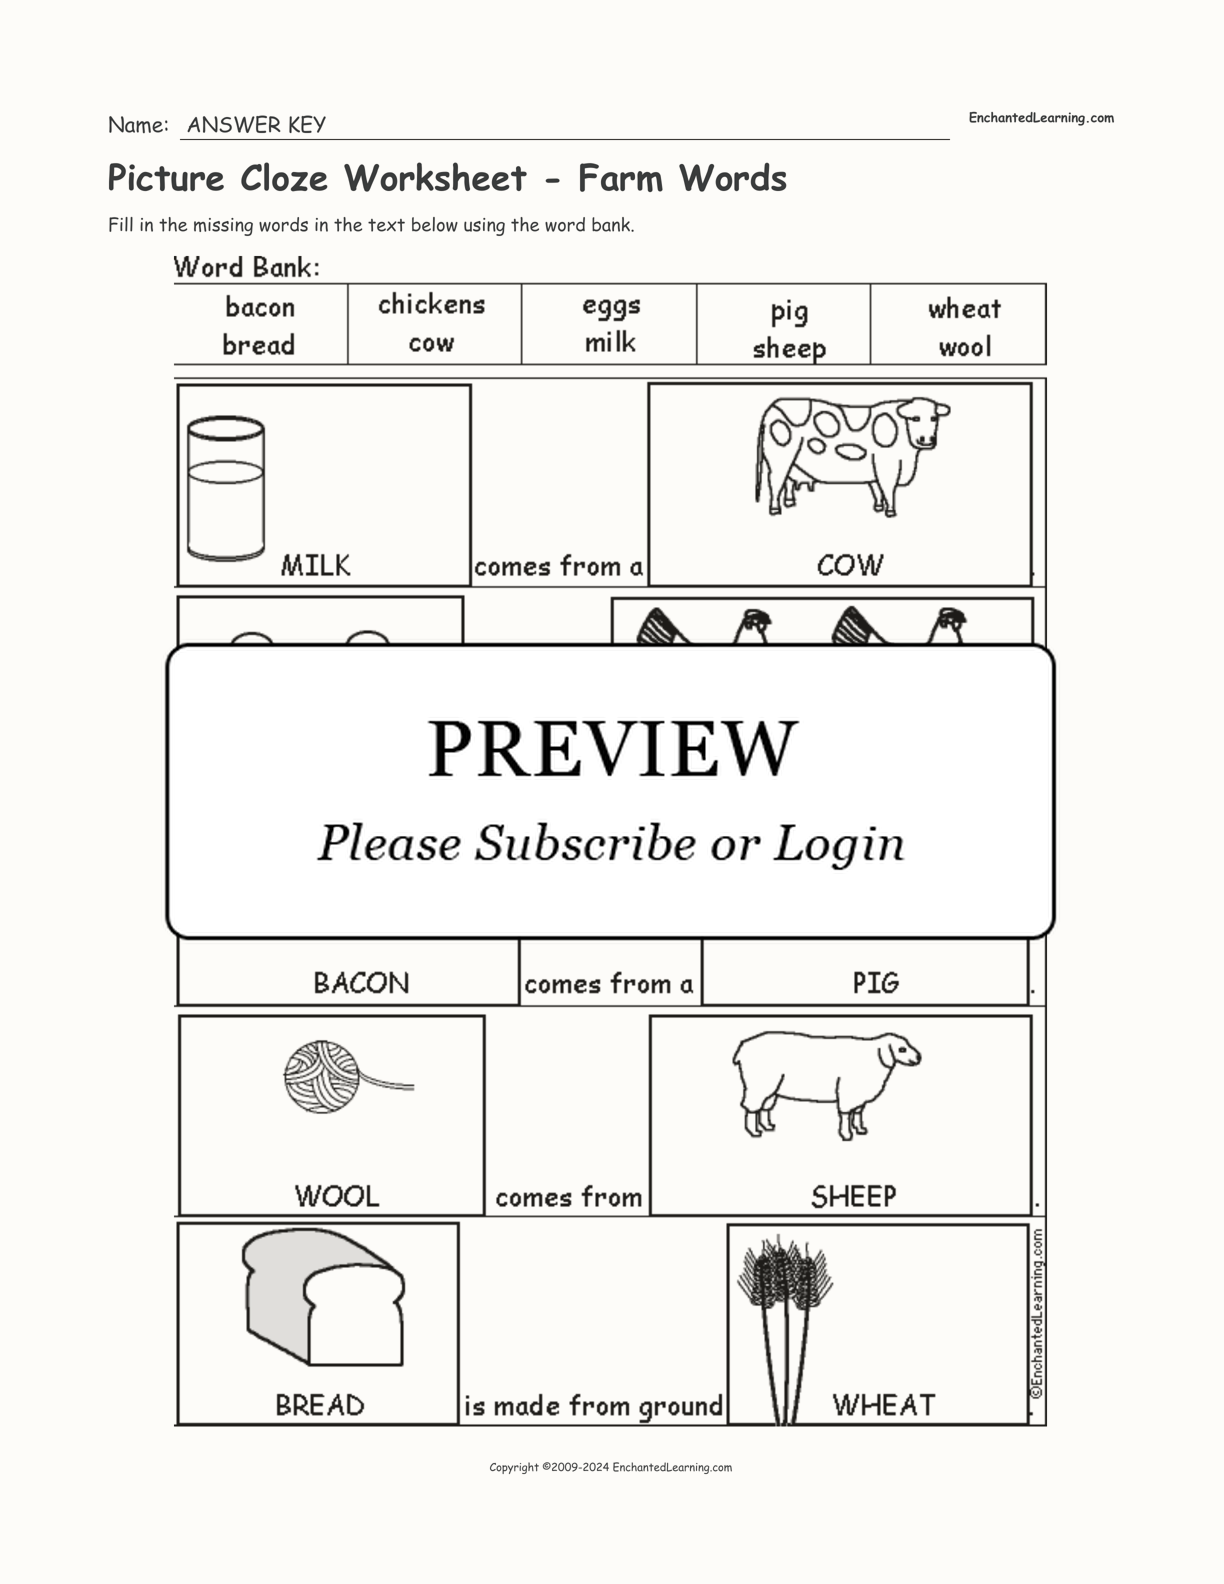 Picture Cloze Worksheet - Farm Words interactive worksheet page 2